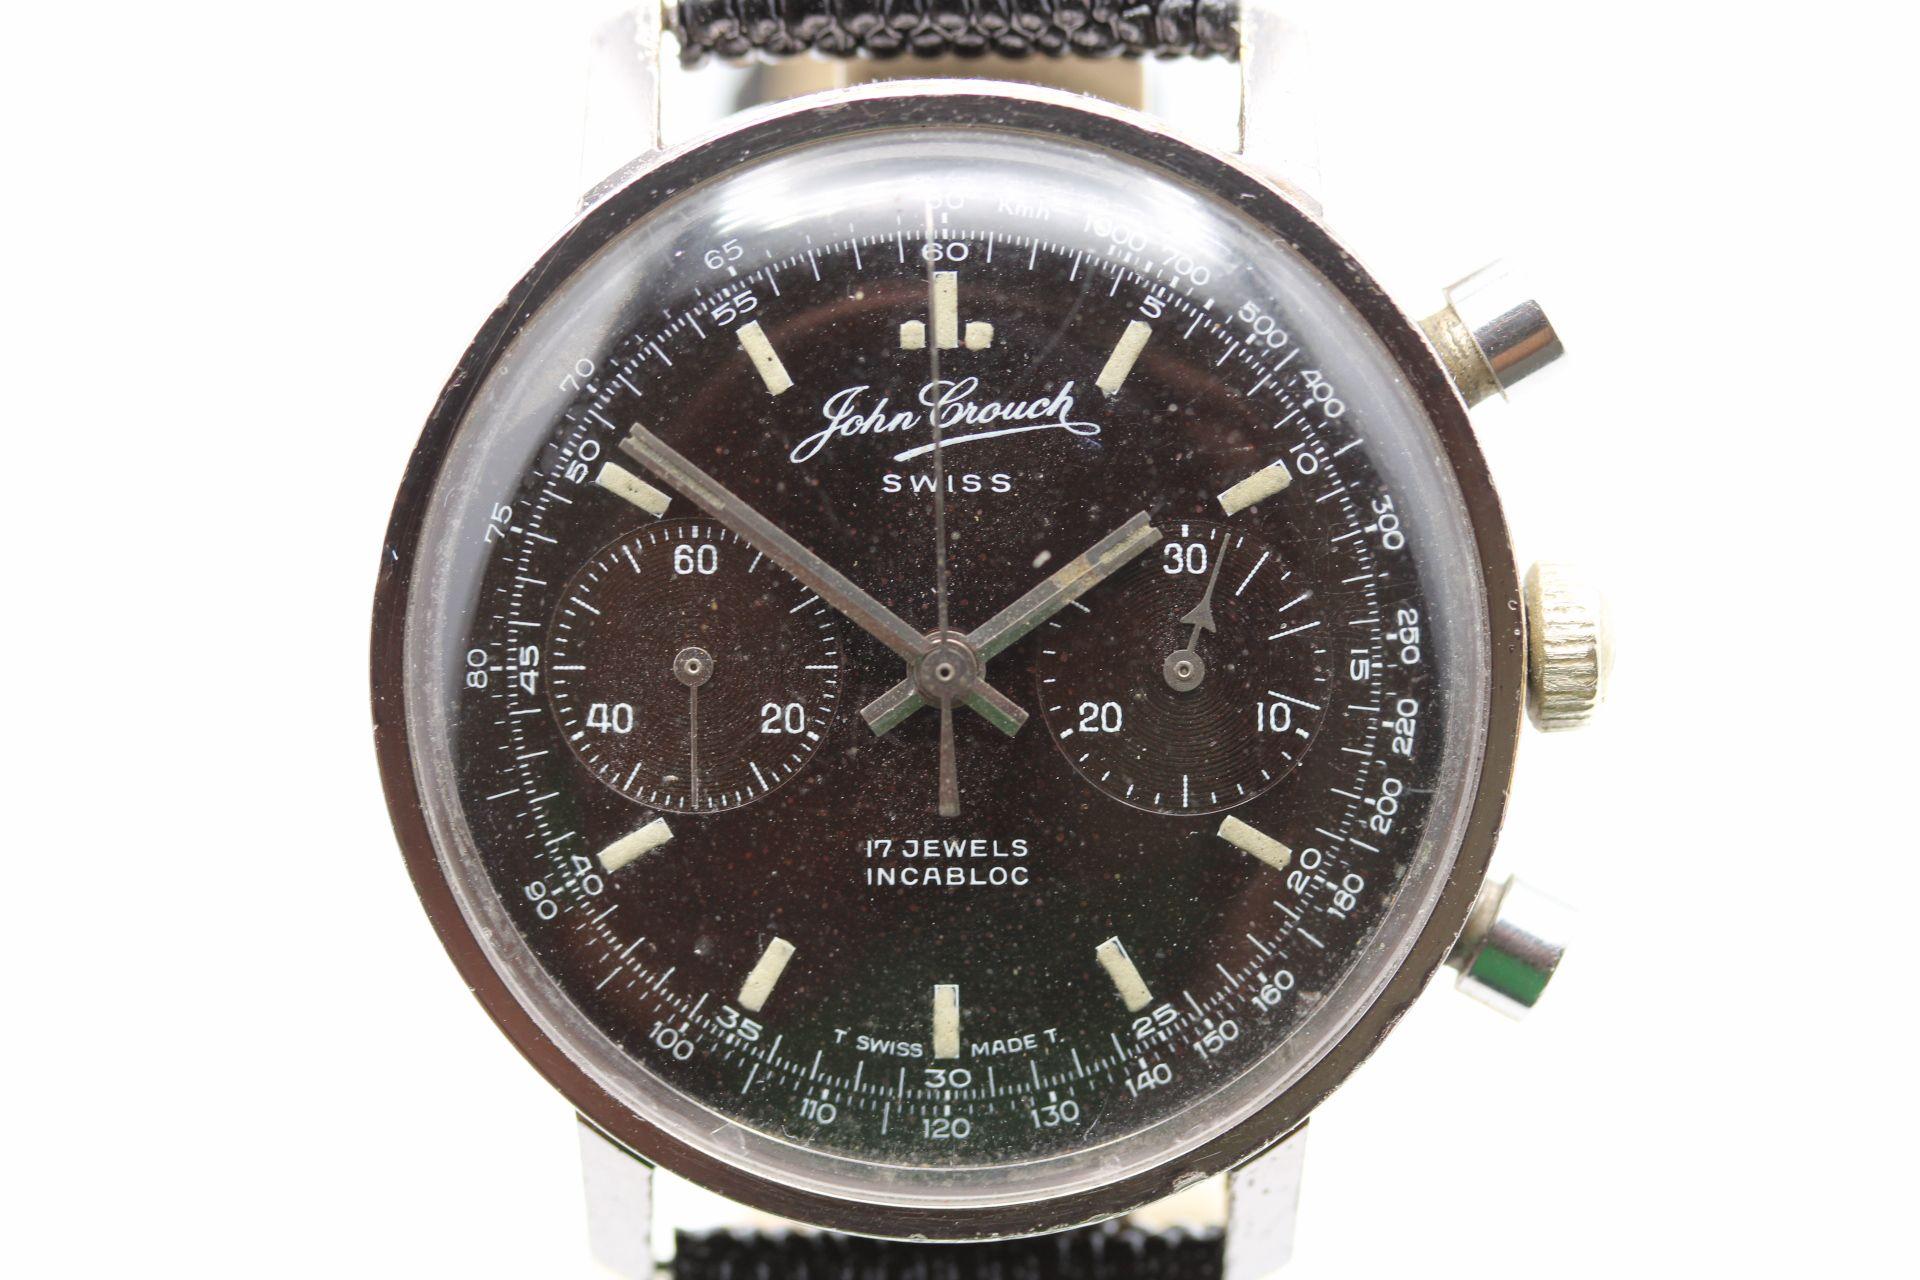 Not much is known about John Crouch, a boutique Swiss Watch manufacture this maybe one of only one advertised but that shouldn't take away from the watch. The manual wind movement powered by a respected 248 Landeron Movement. 

Stainless steel case